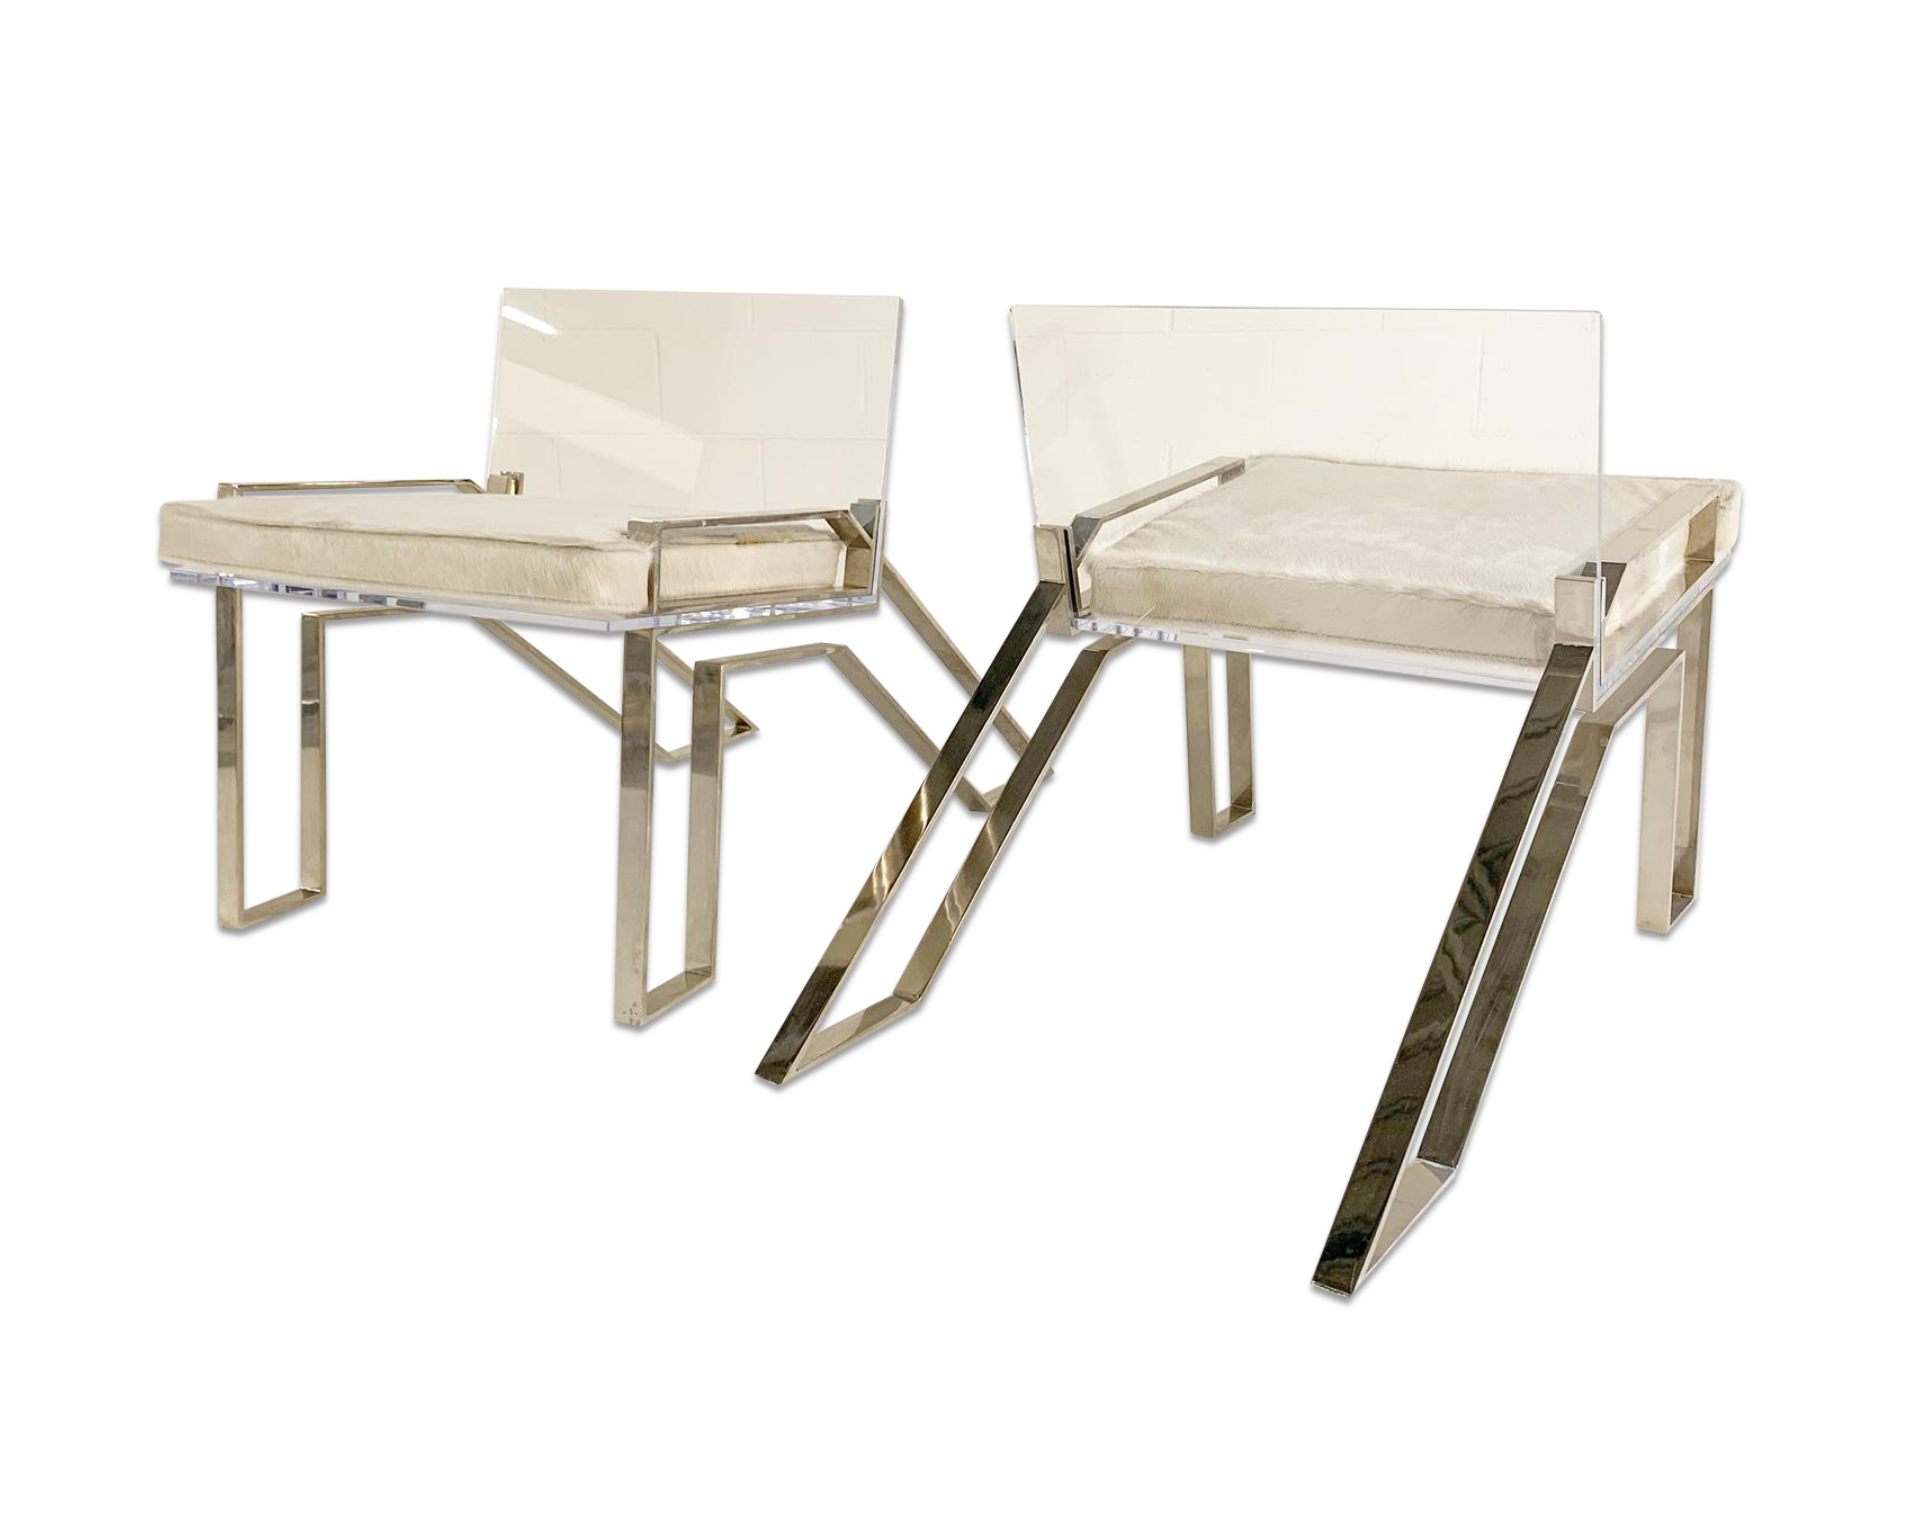 Lucite Adirondack Chairs with Brazilian Cowhide Cushions, pair - FORSYTH